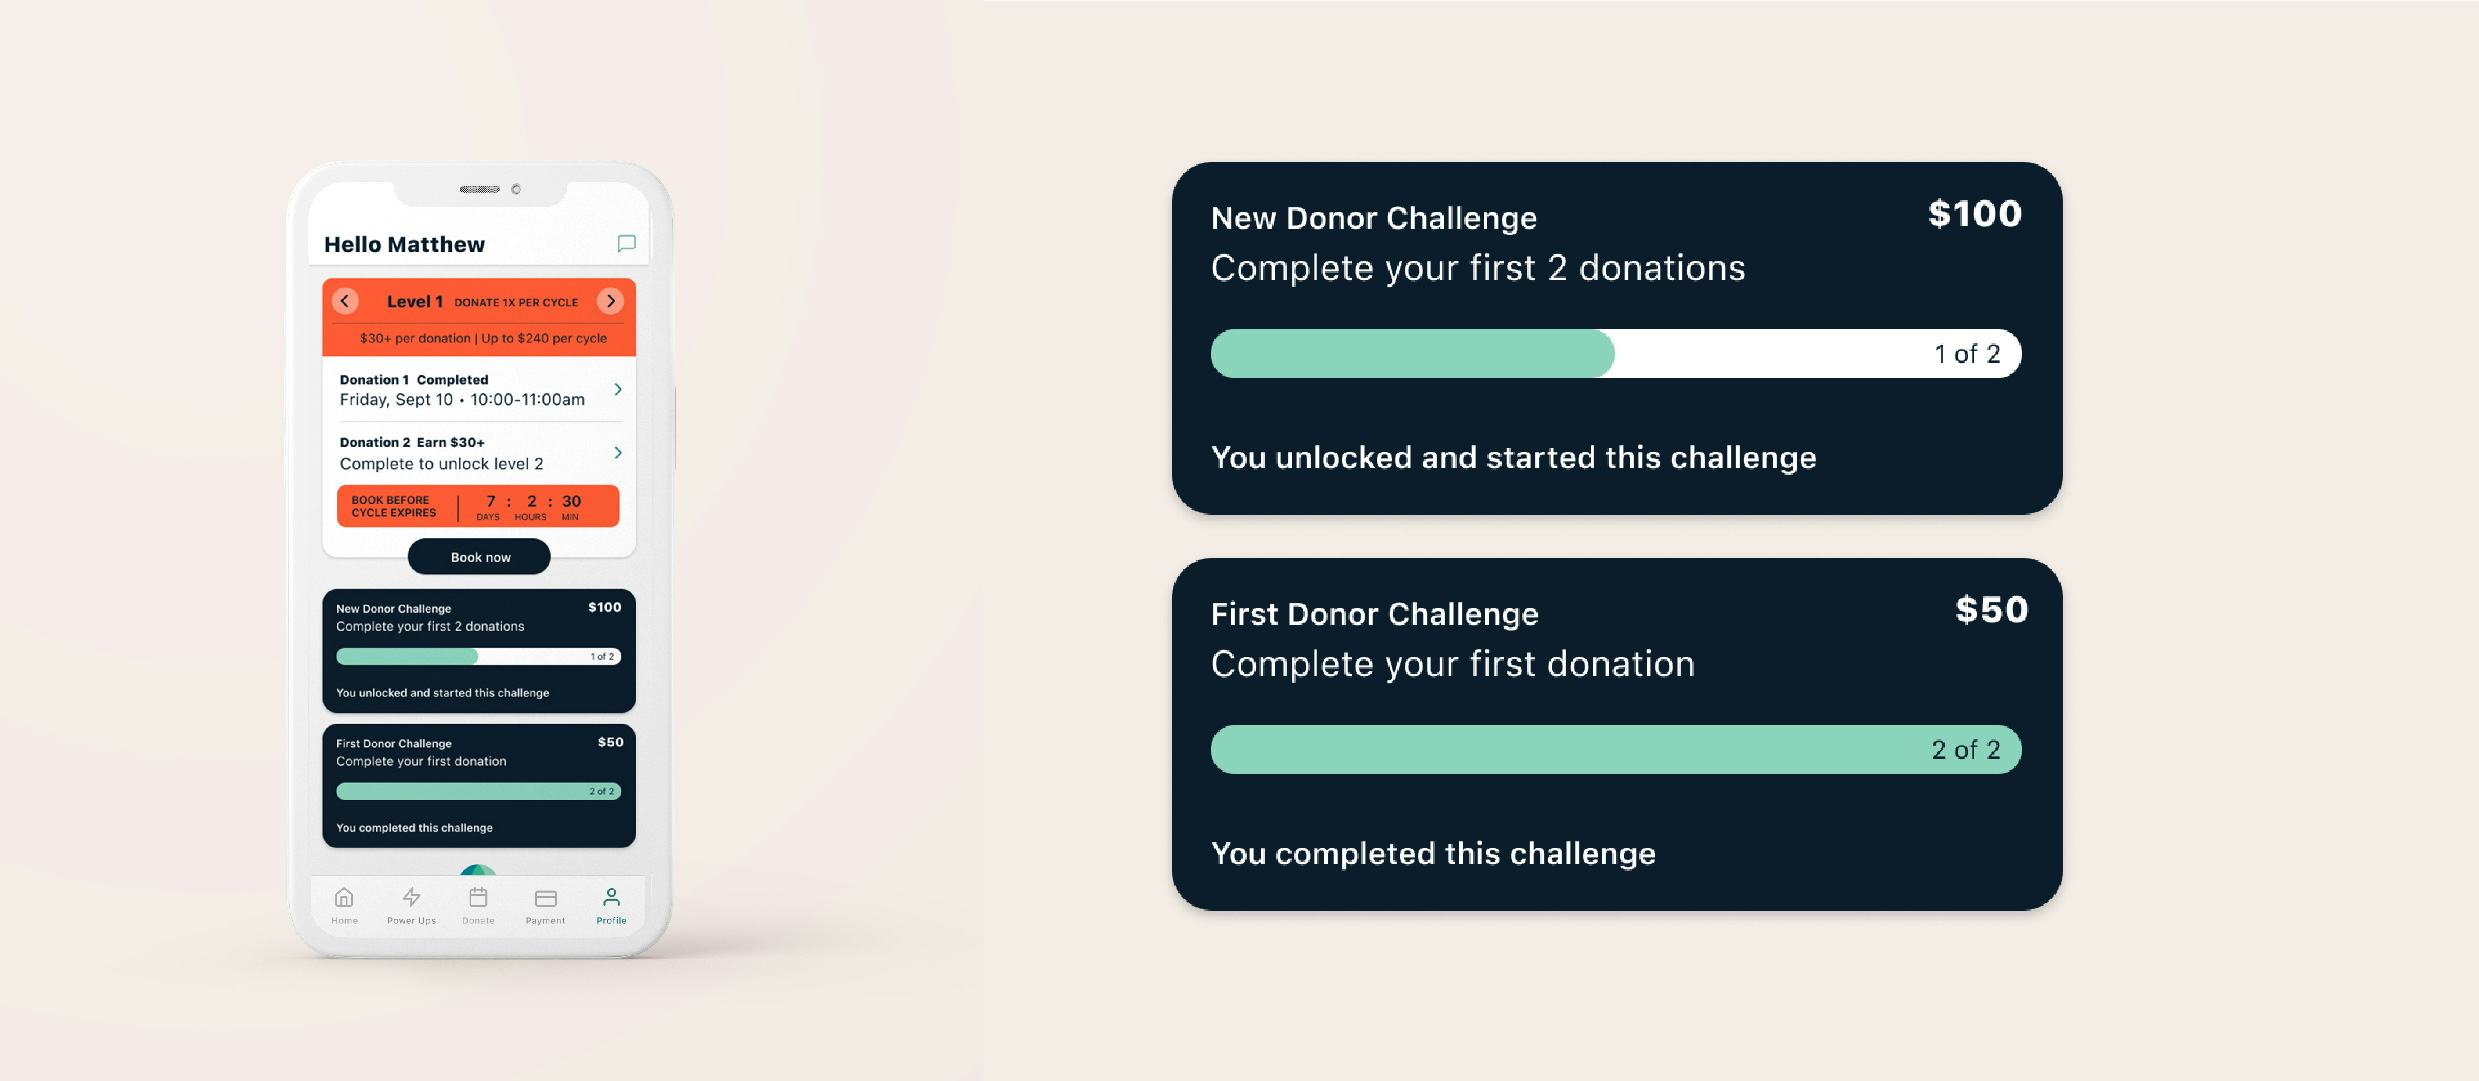 Image of Parachute app home screen with close-up of new donor challenge